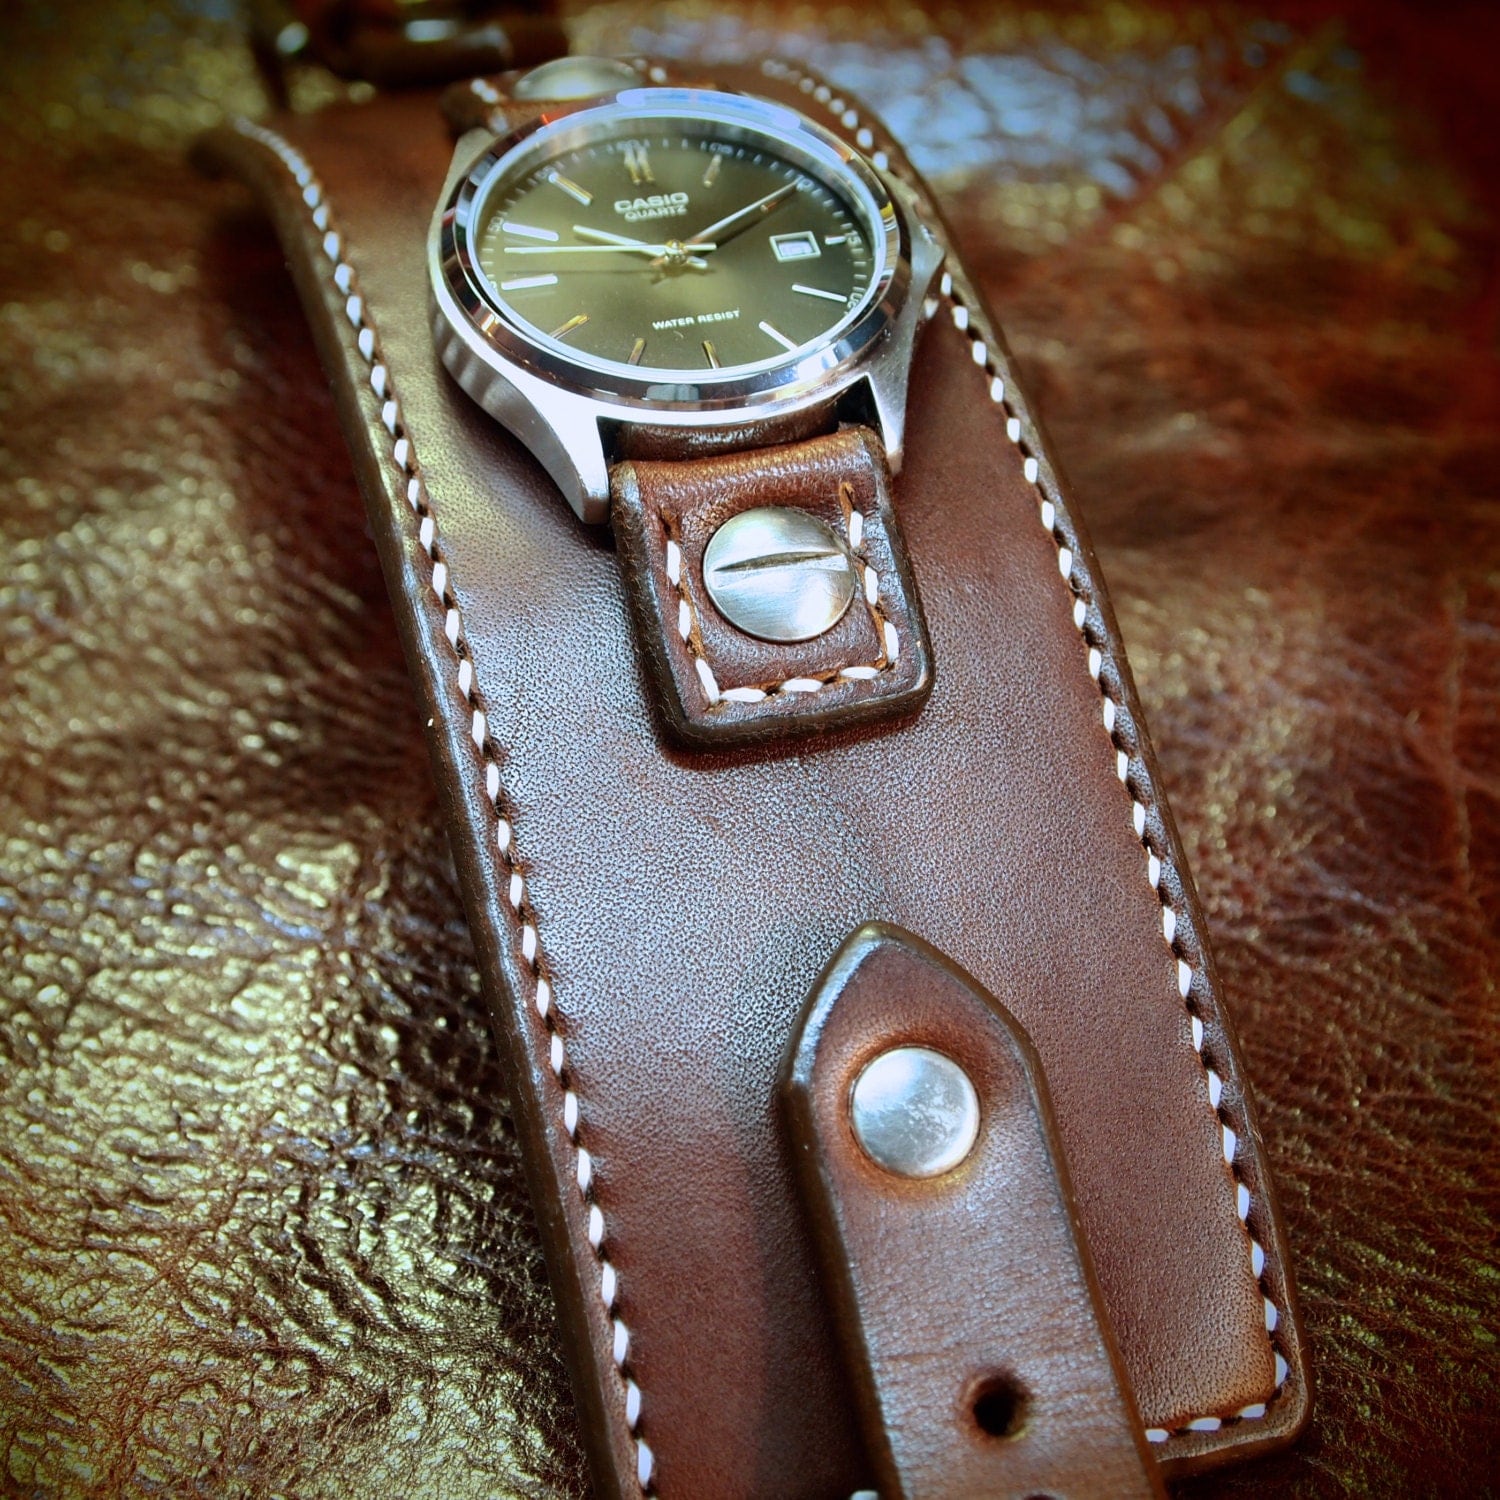 Leather cuff Watch -Vintage brown bridle leather handstitched watch ...